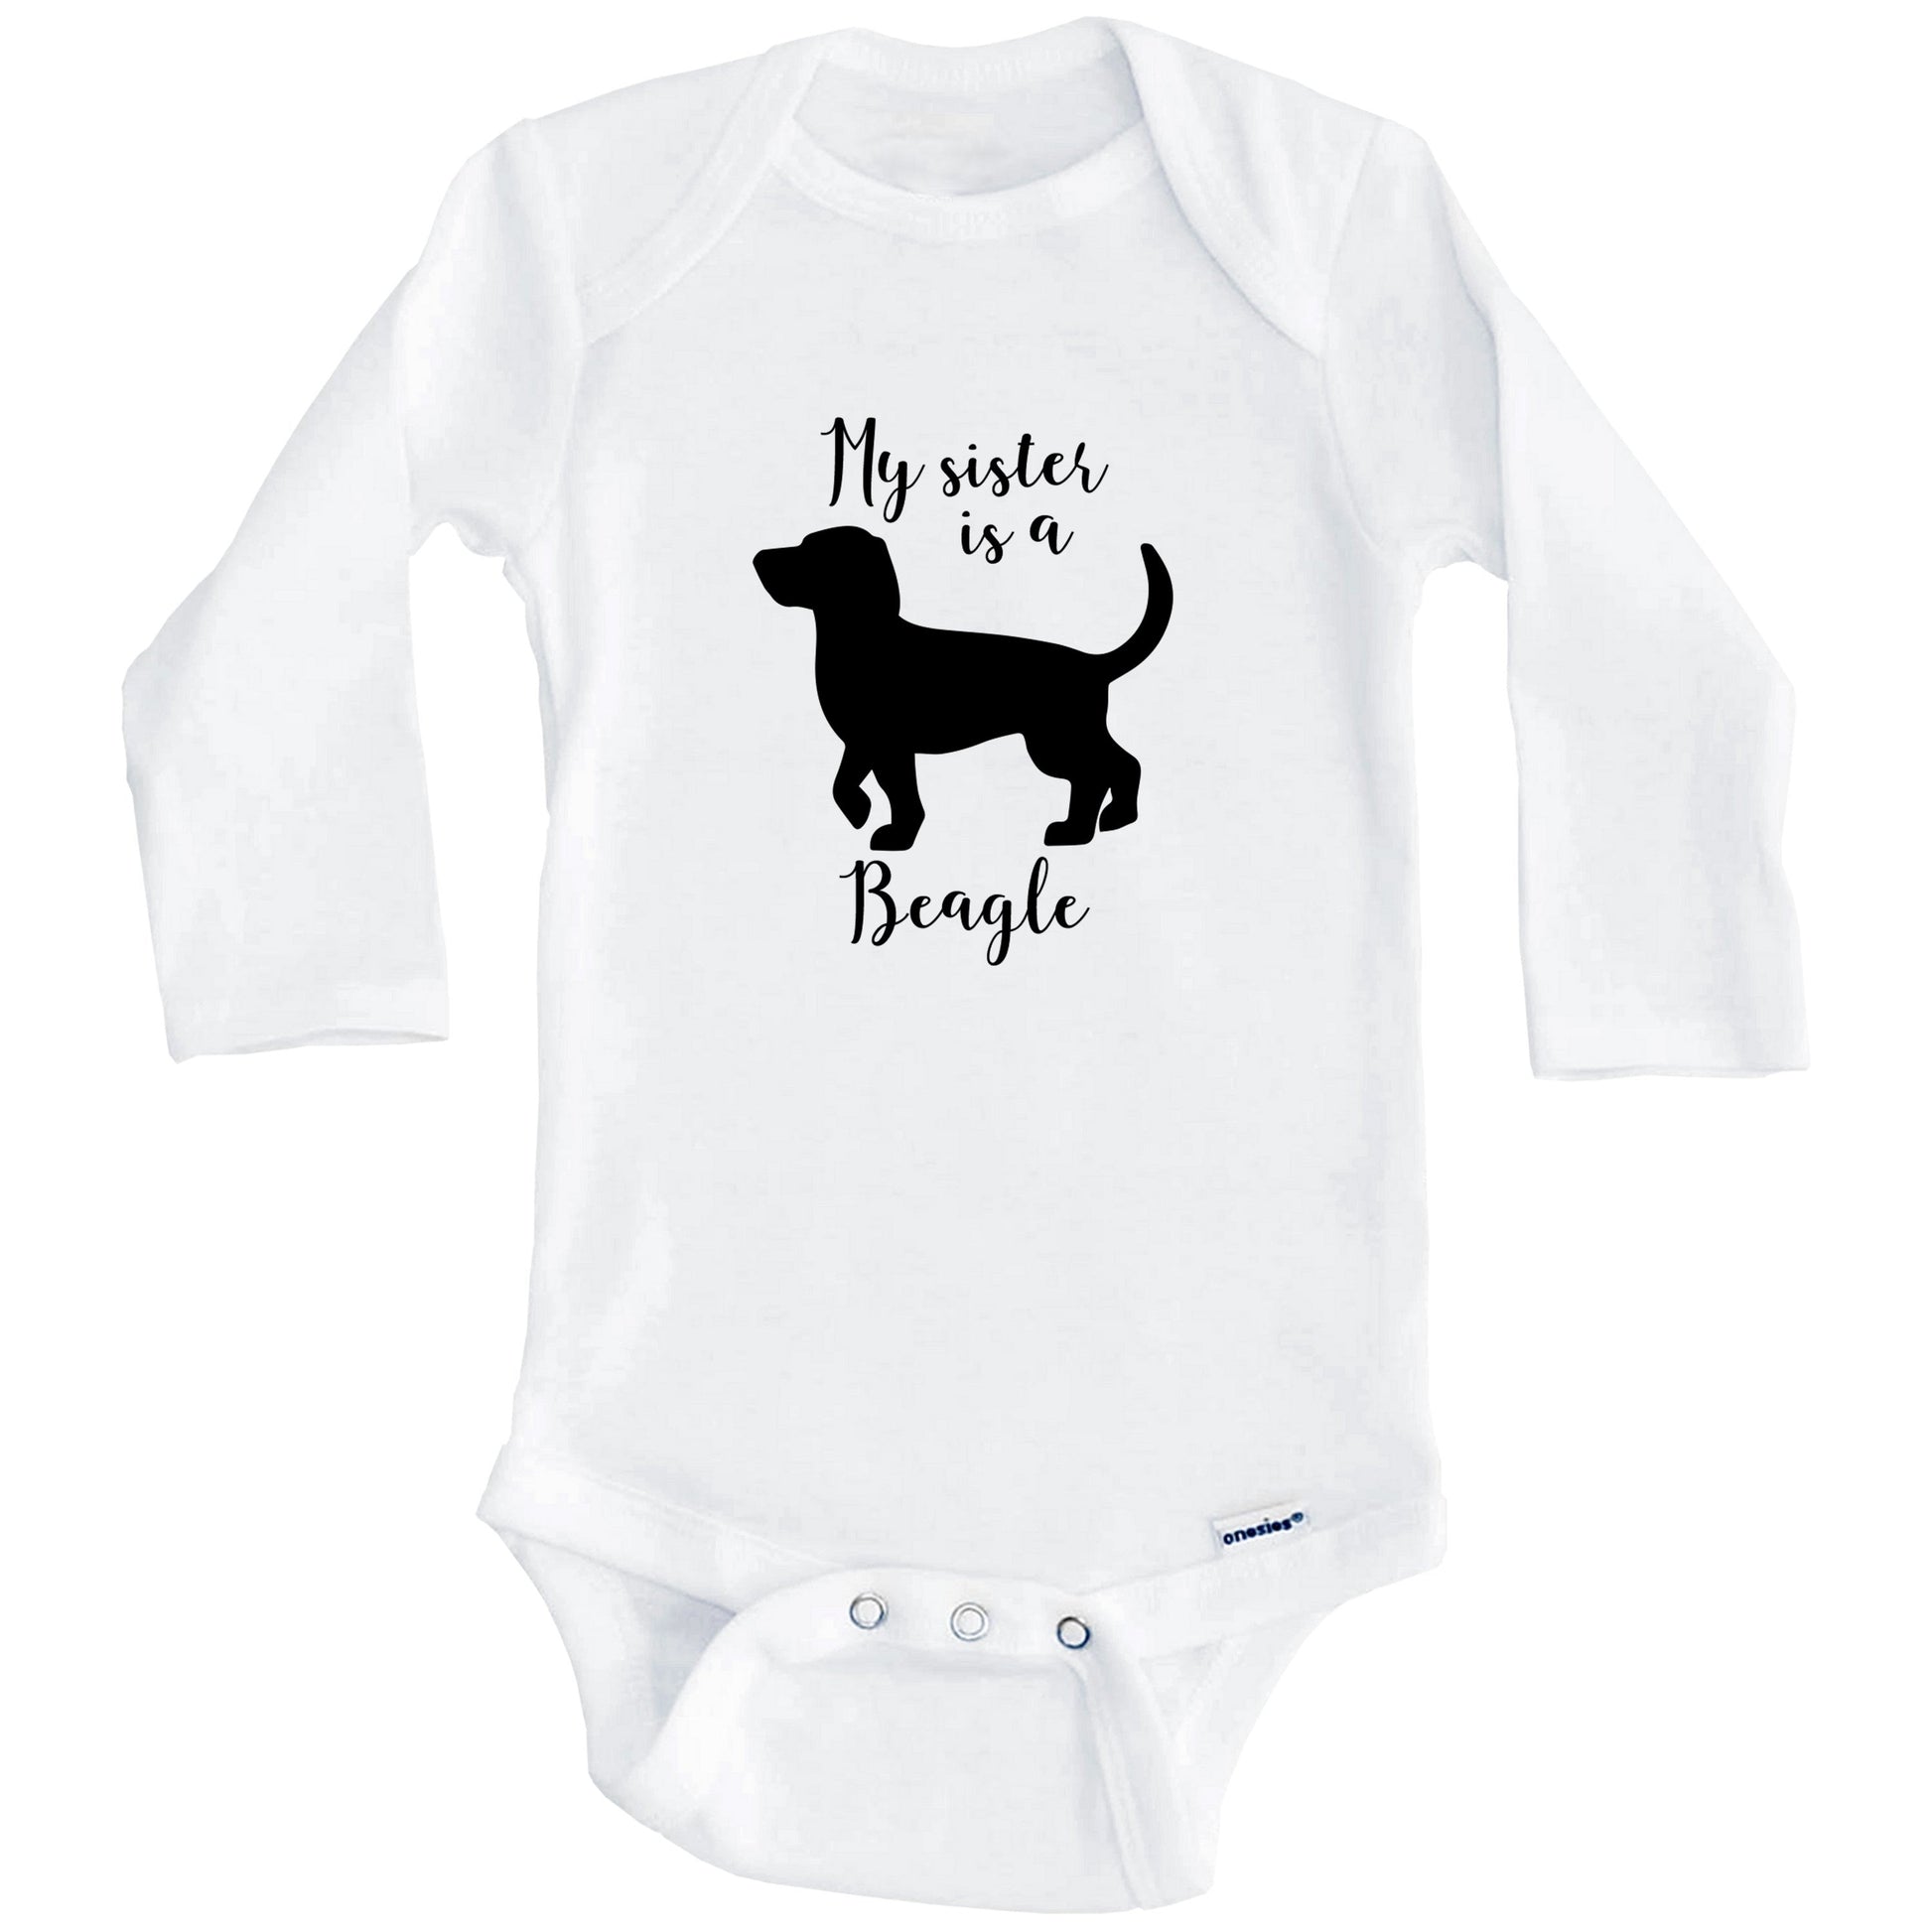 My Sister Is A Beagle Cute Dog Baby Onesie - Beagle One Piece Baby Bodysuit (Long Sleeves)